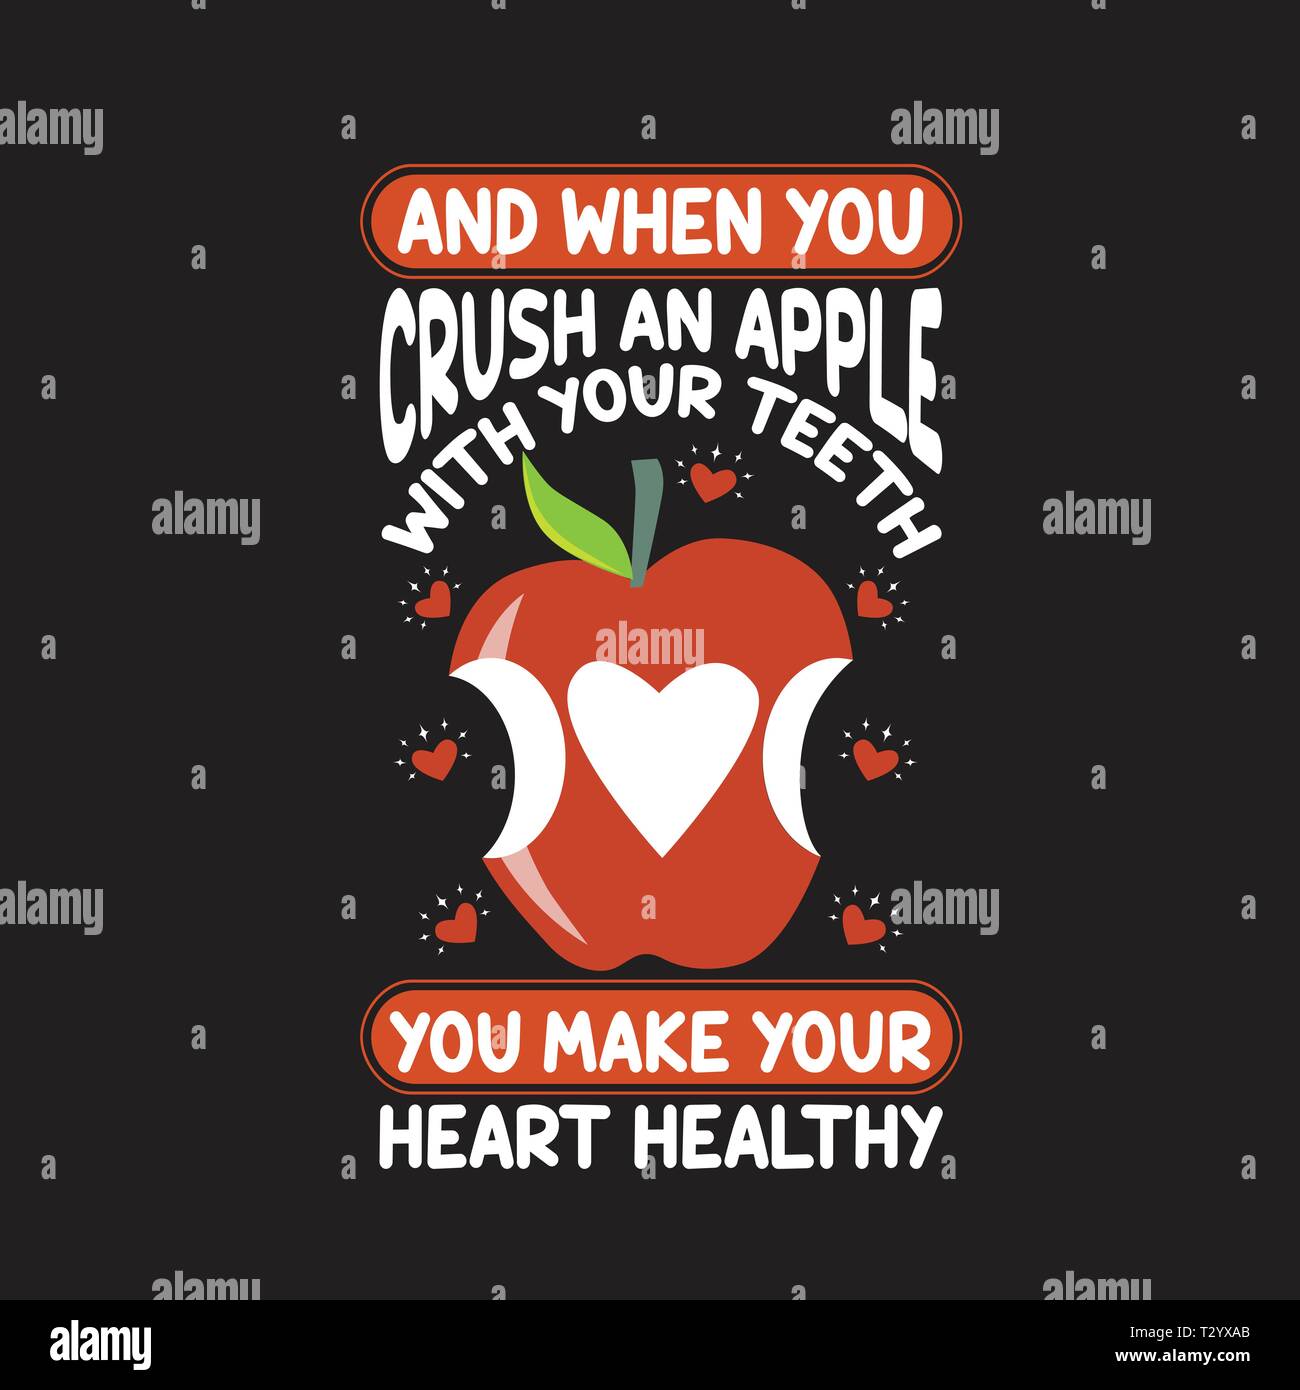 Apple Quote and saying. And when you crush an apple with your teeth, you make your heart healthy Stock Vector